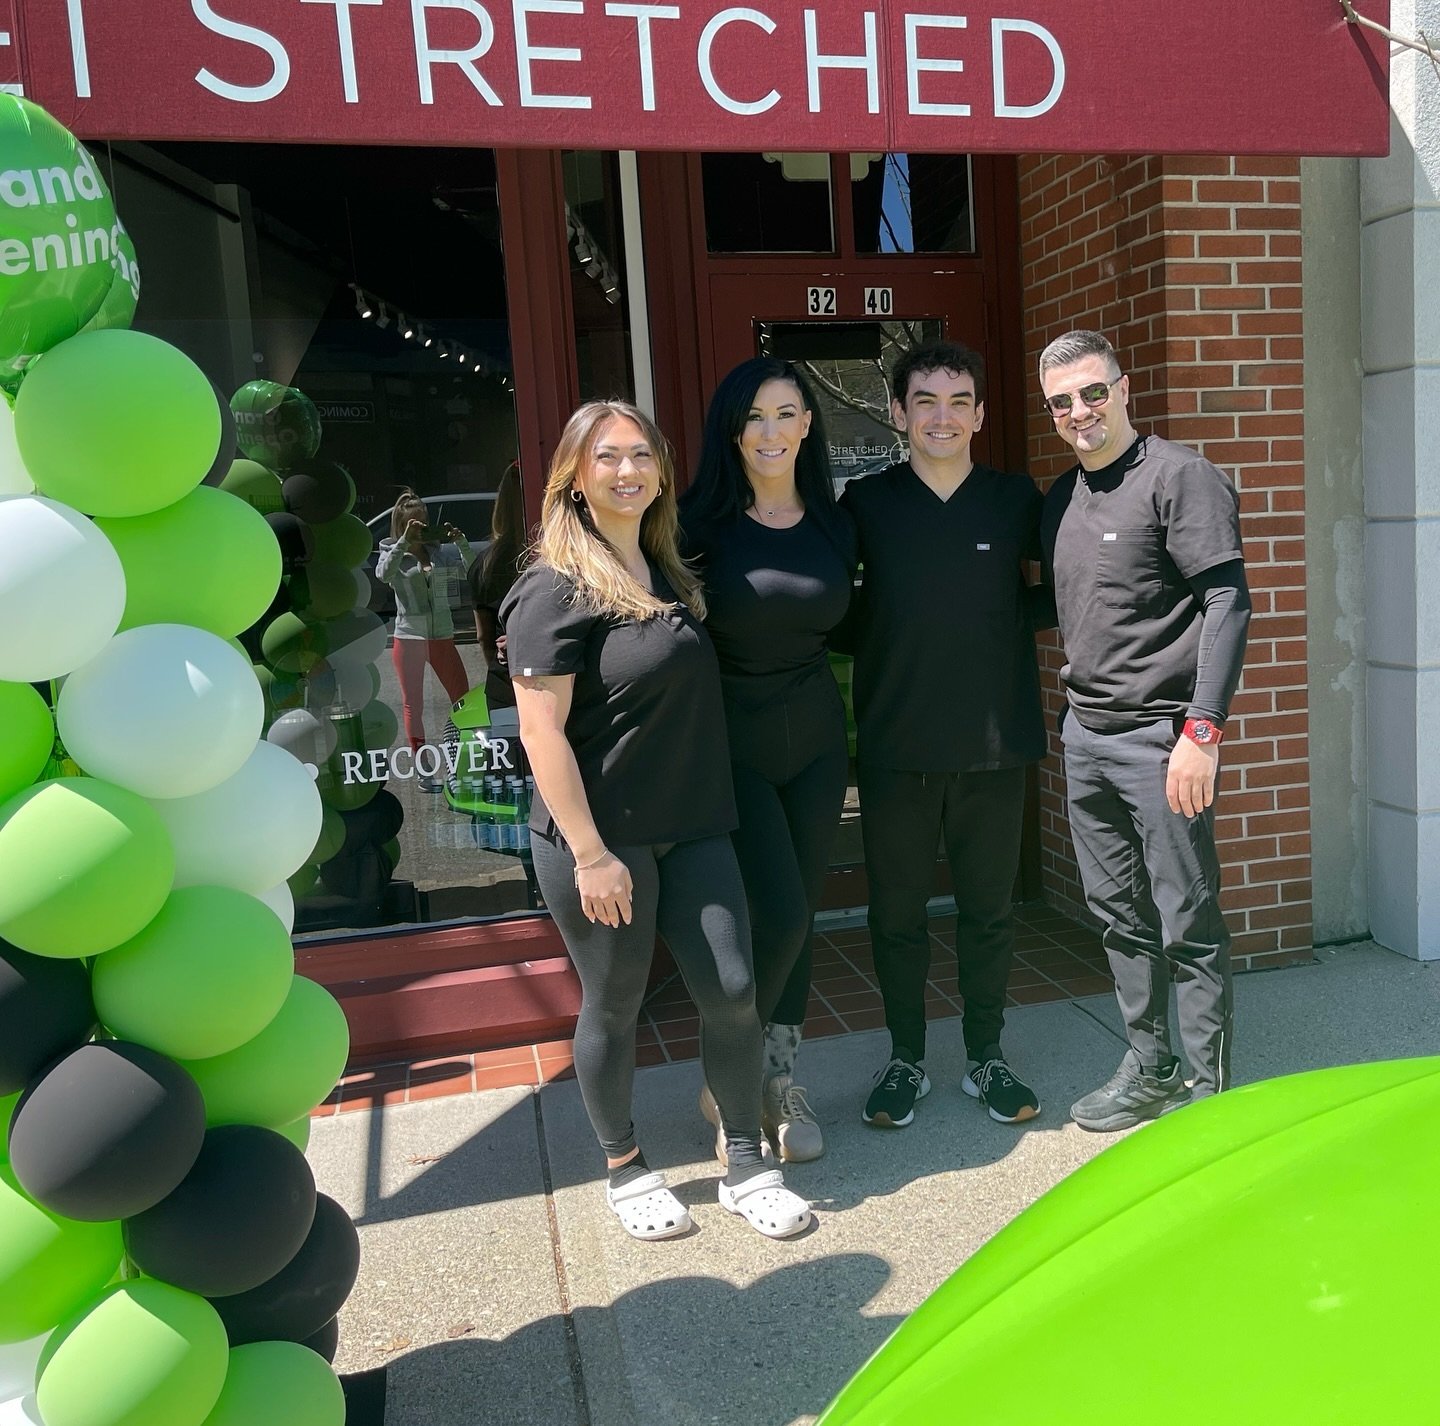 ✳️ GRAND OPENING ✳️ Come down and meet our team of certified stretch therapists for a free stretch all day today til 7pm.